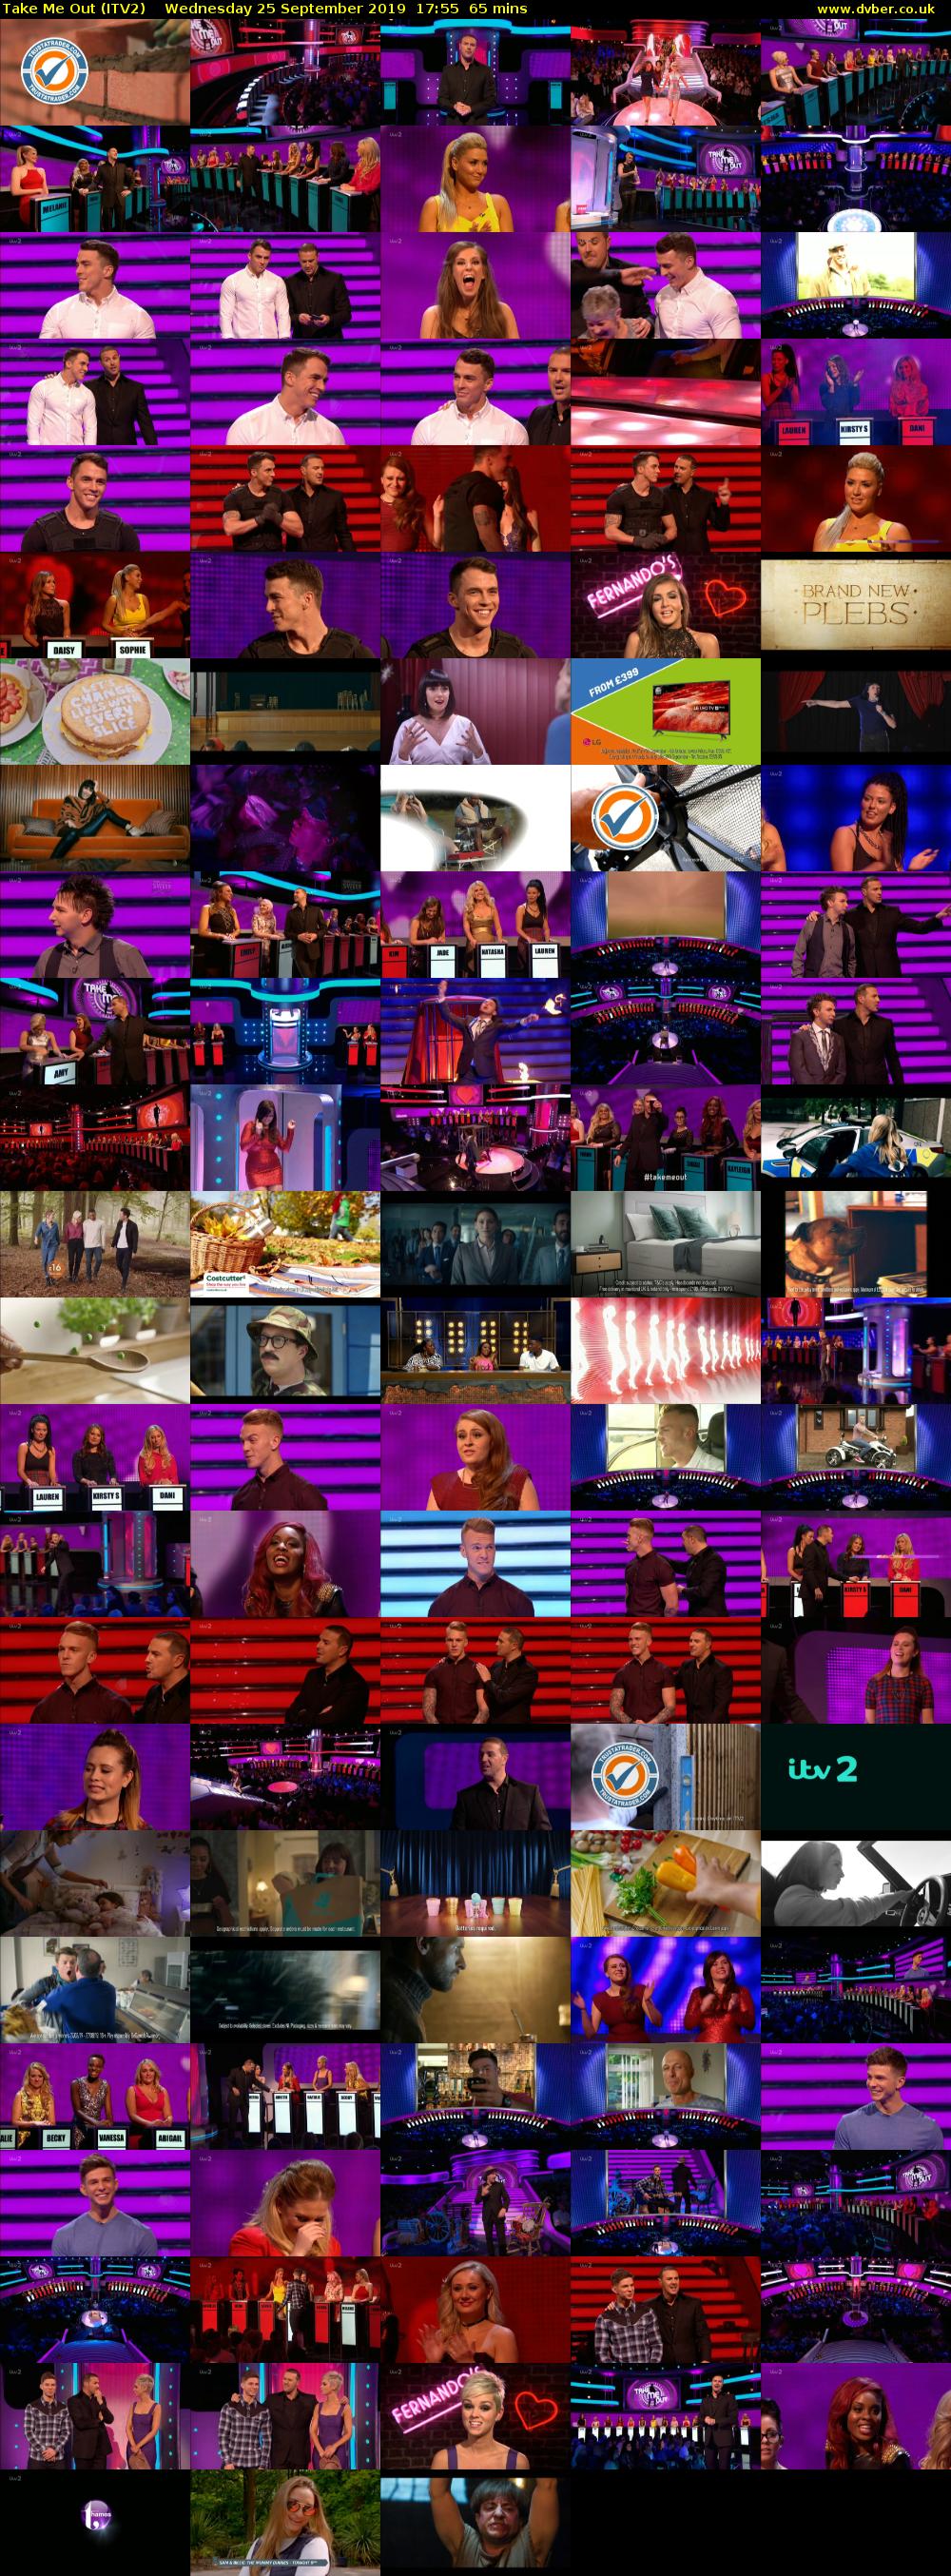 Take Me Out (ITV2) Wednesday 25 September 2019 17:55 - 19:00